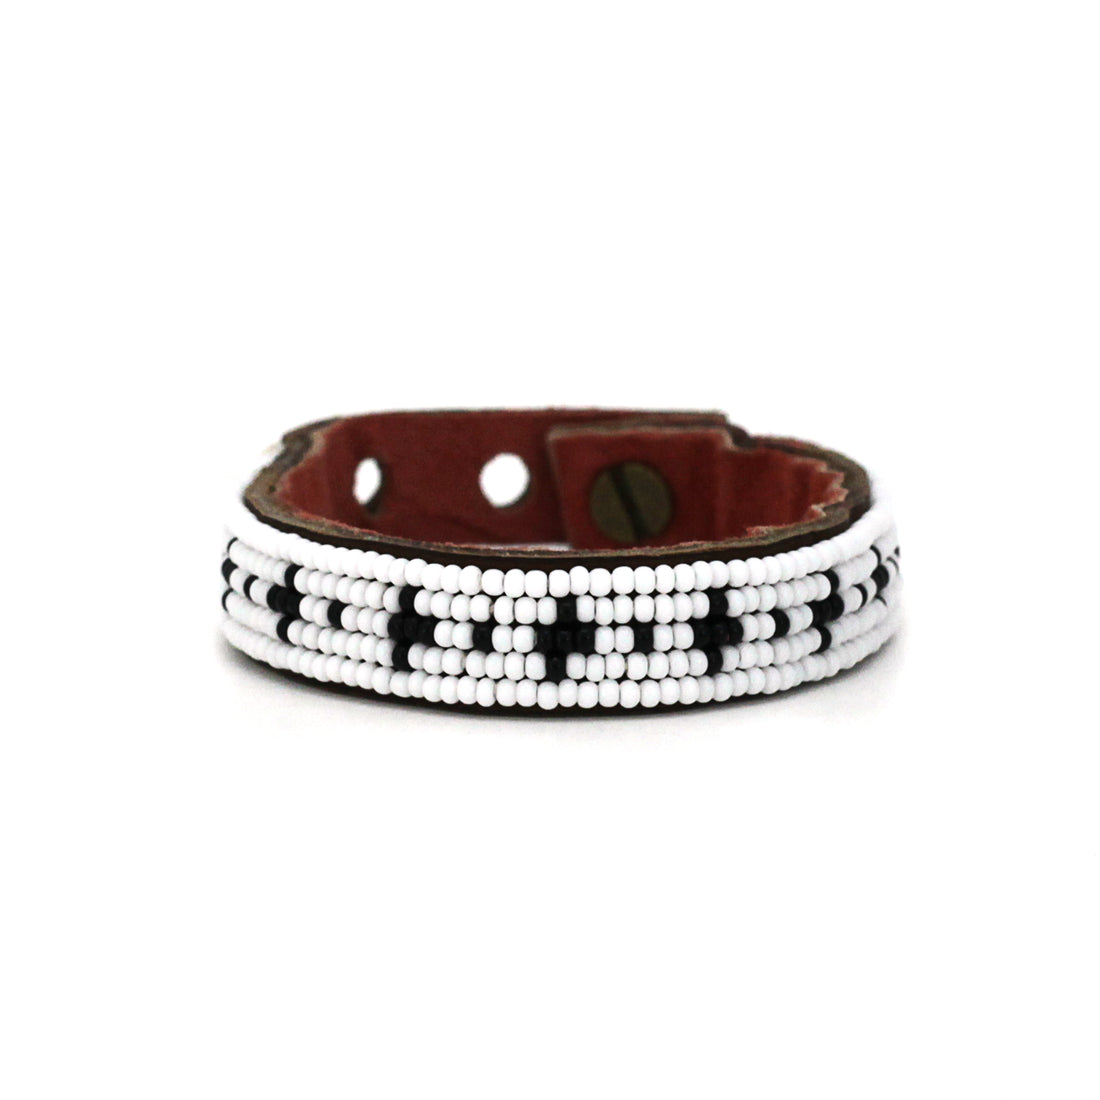 Stars Black and White Beaded Leather Cuff